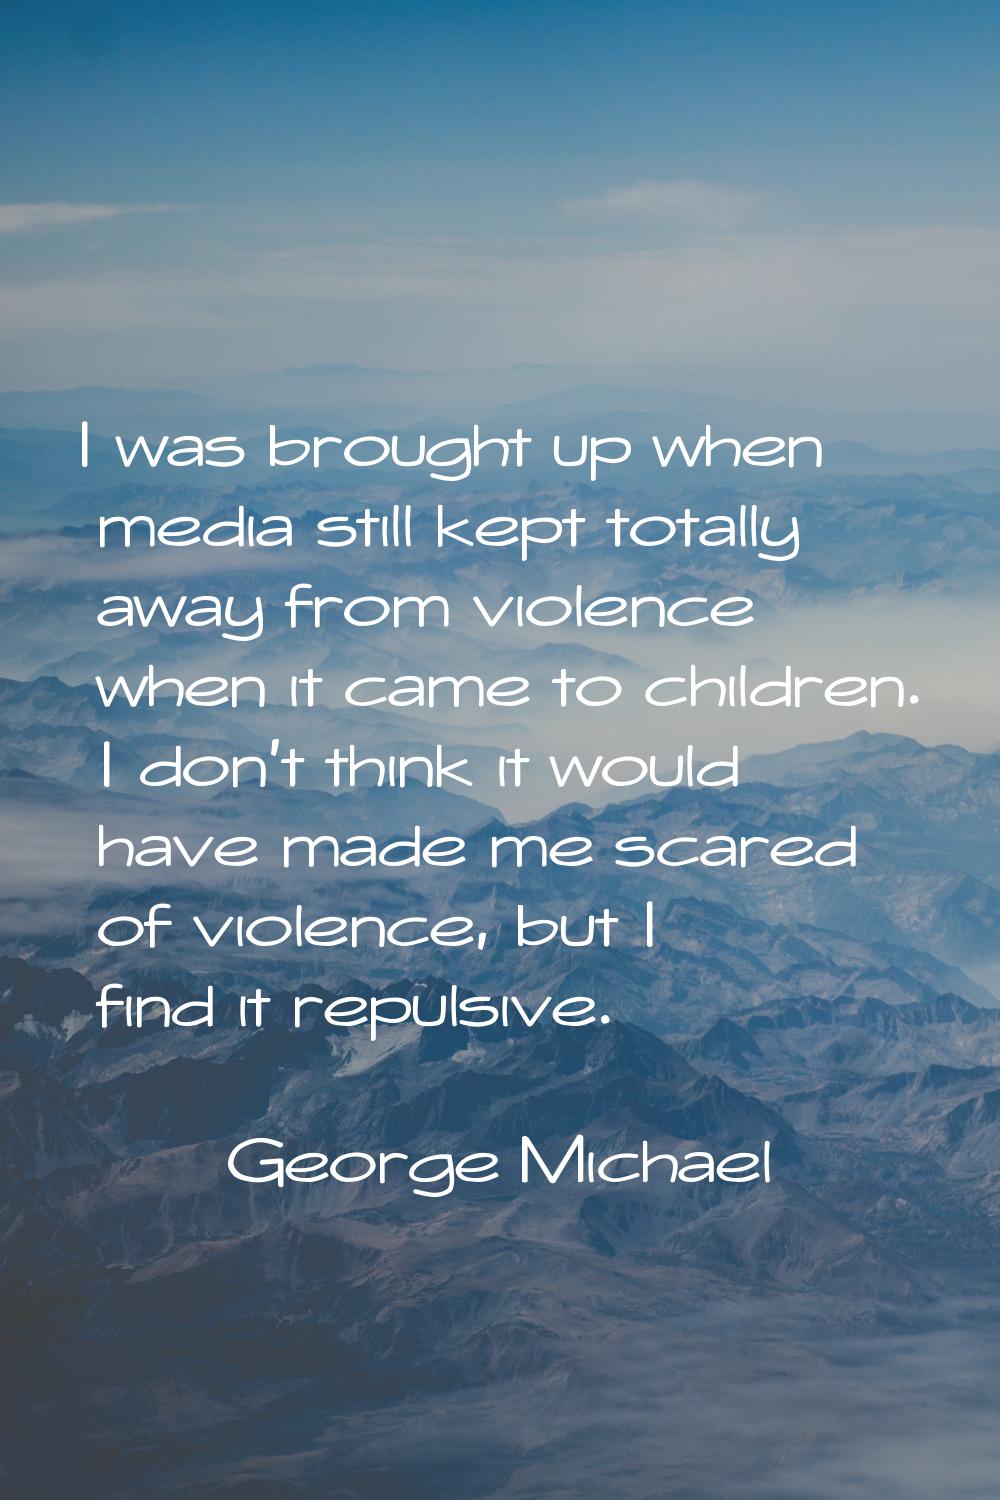 I was brought up when media still kept totally away from violence when it came to children. I don't